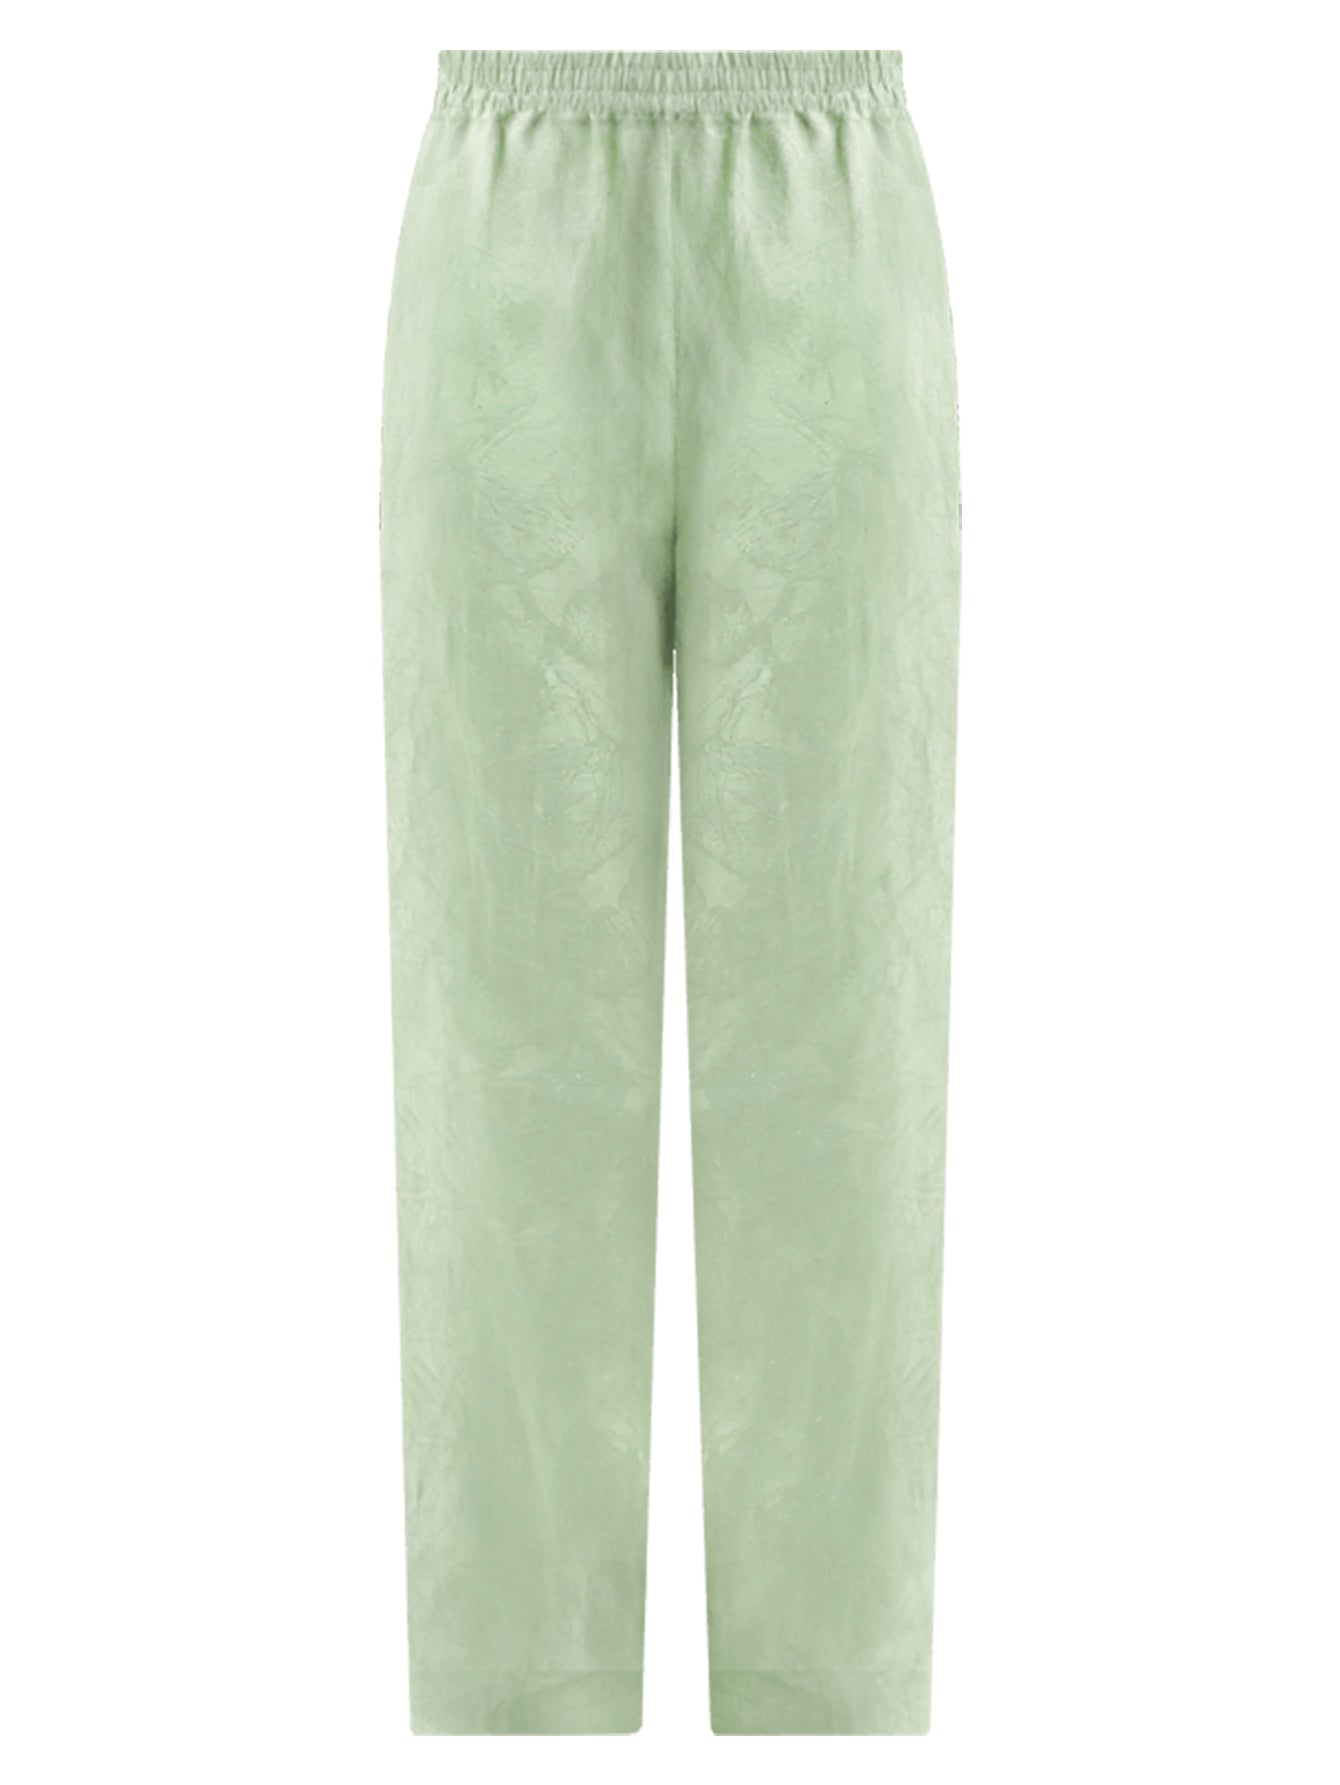 relaxed-fit-light-green-ankle-pants_all_green_4.jpg